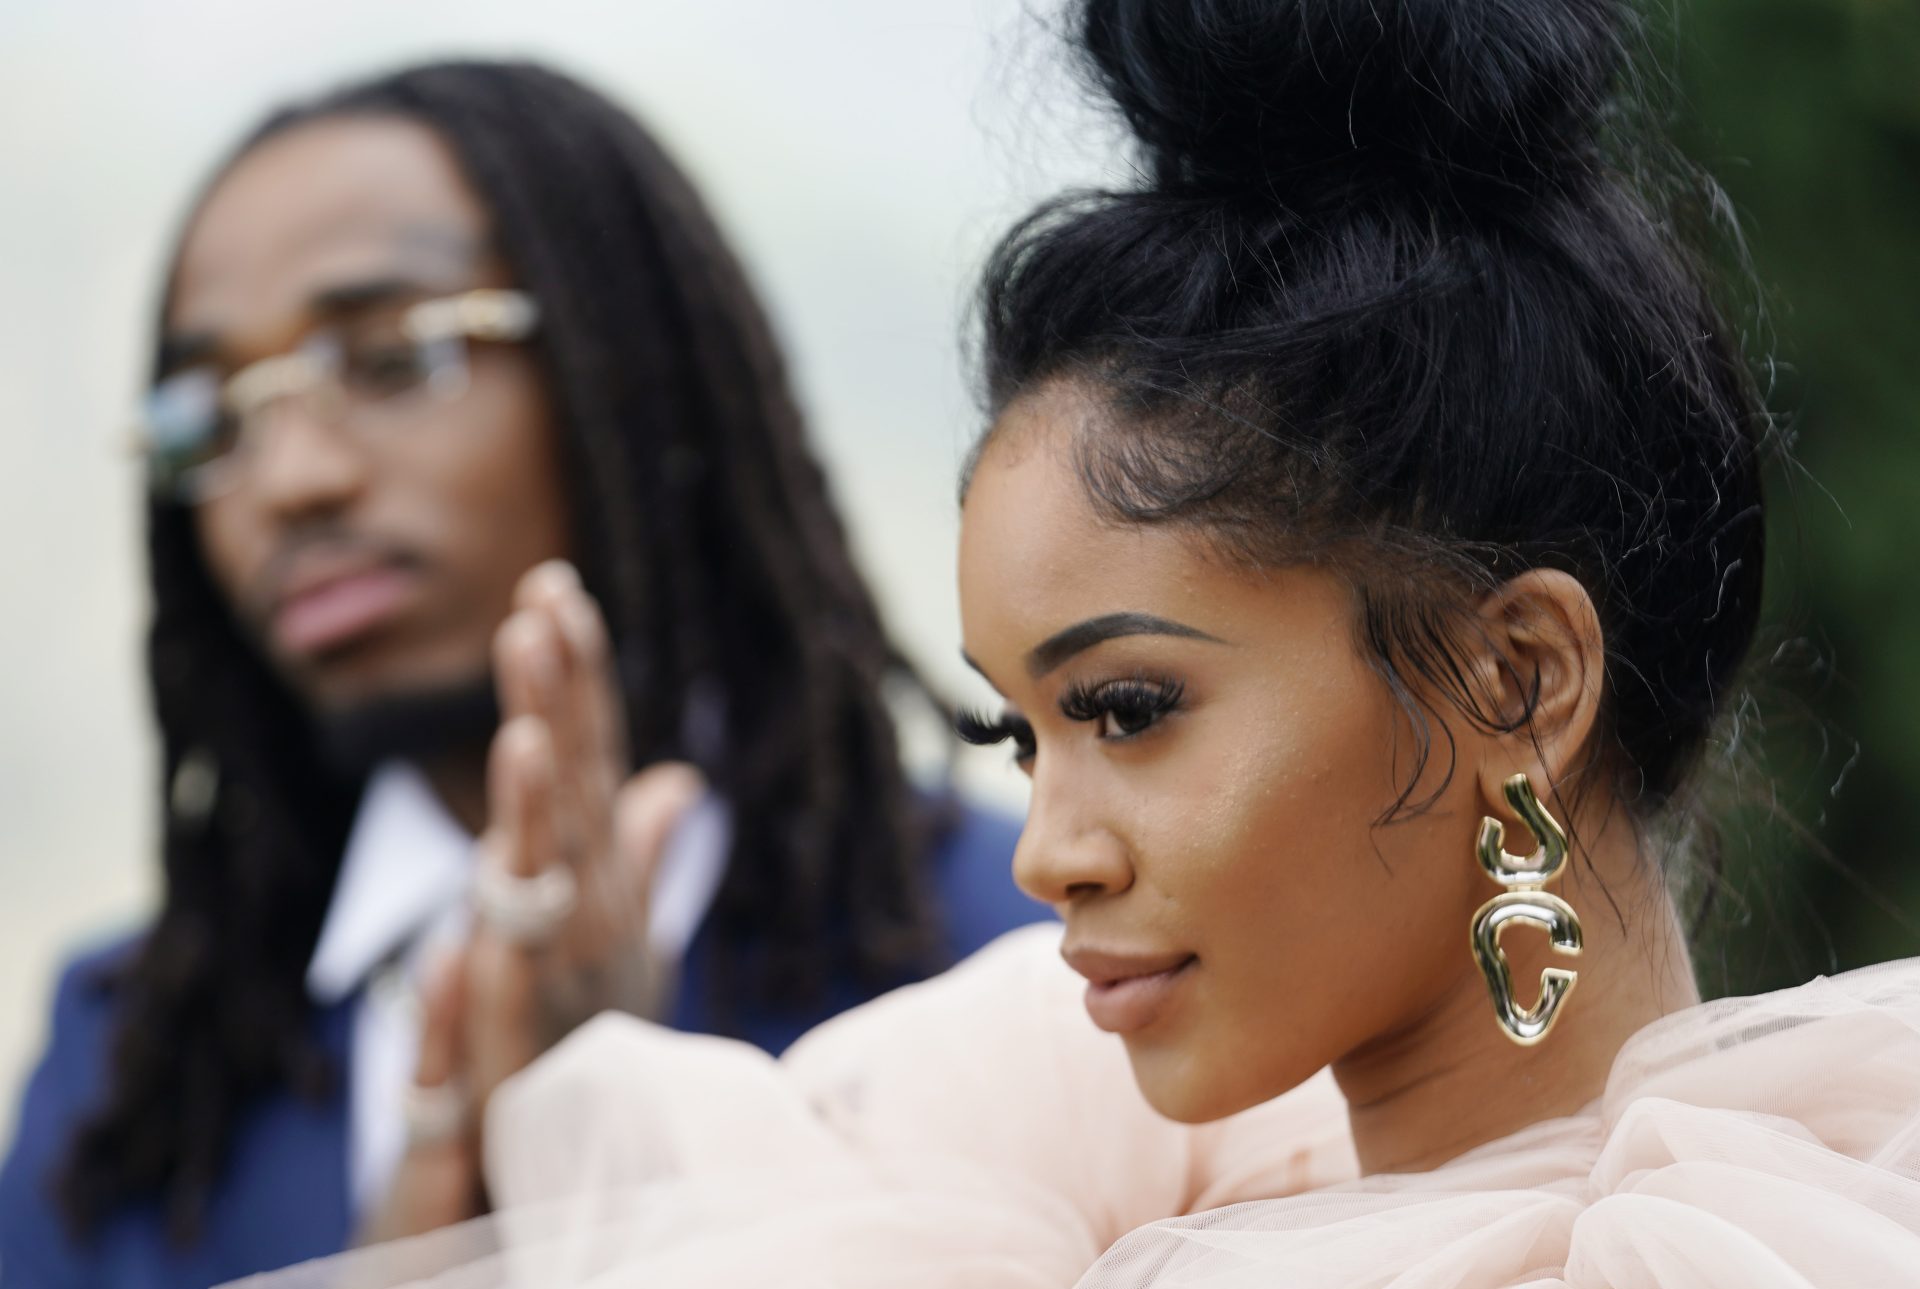 Saweetie Exposes DM From Quavo In Response To Him Naming Her In His New Diss Track